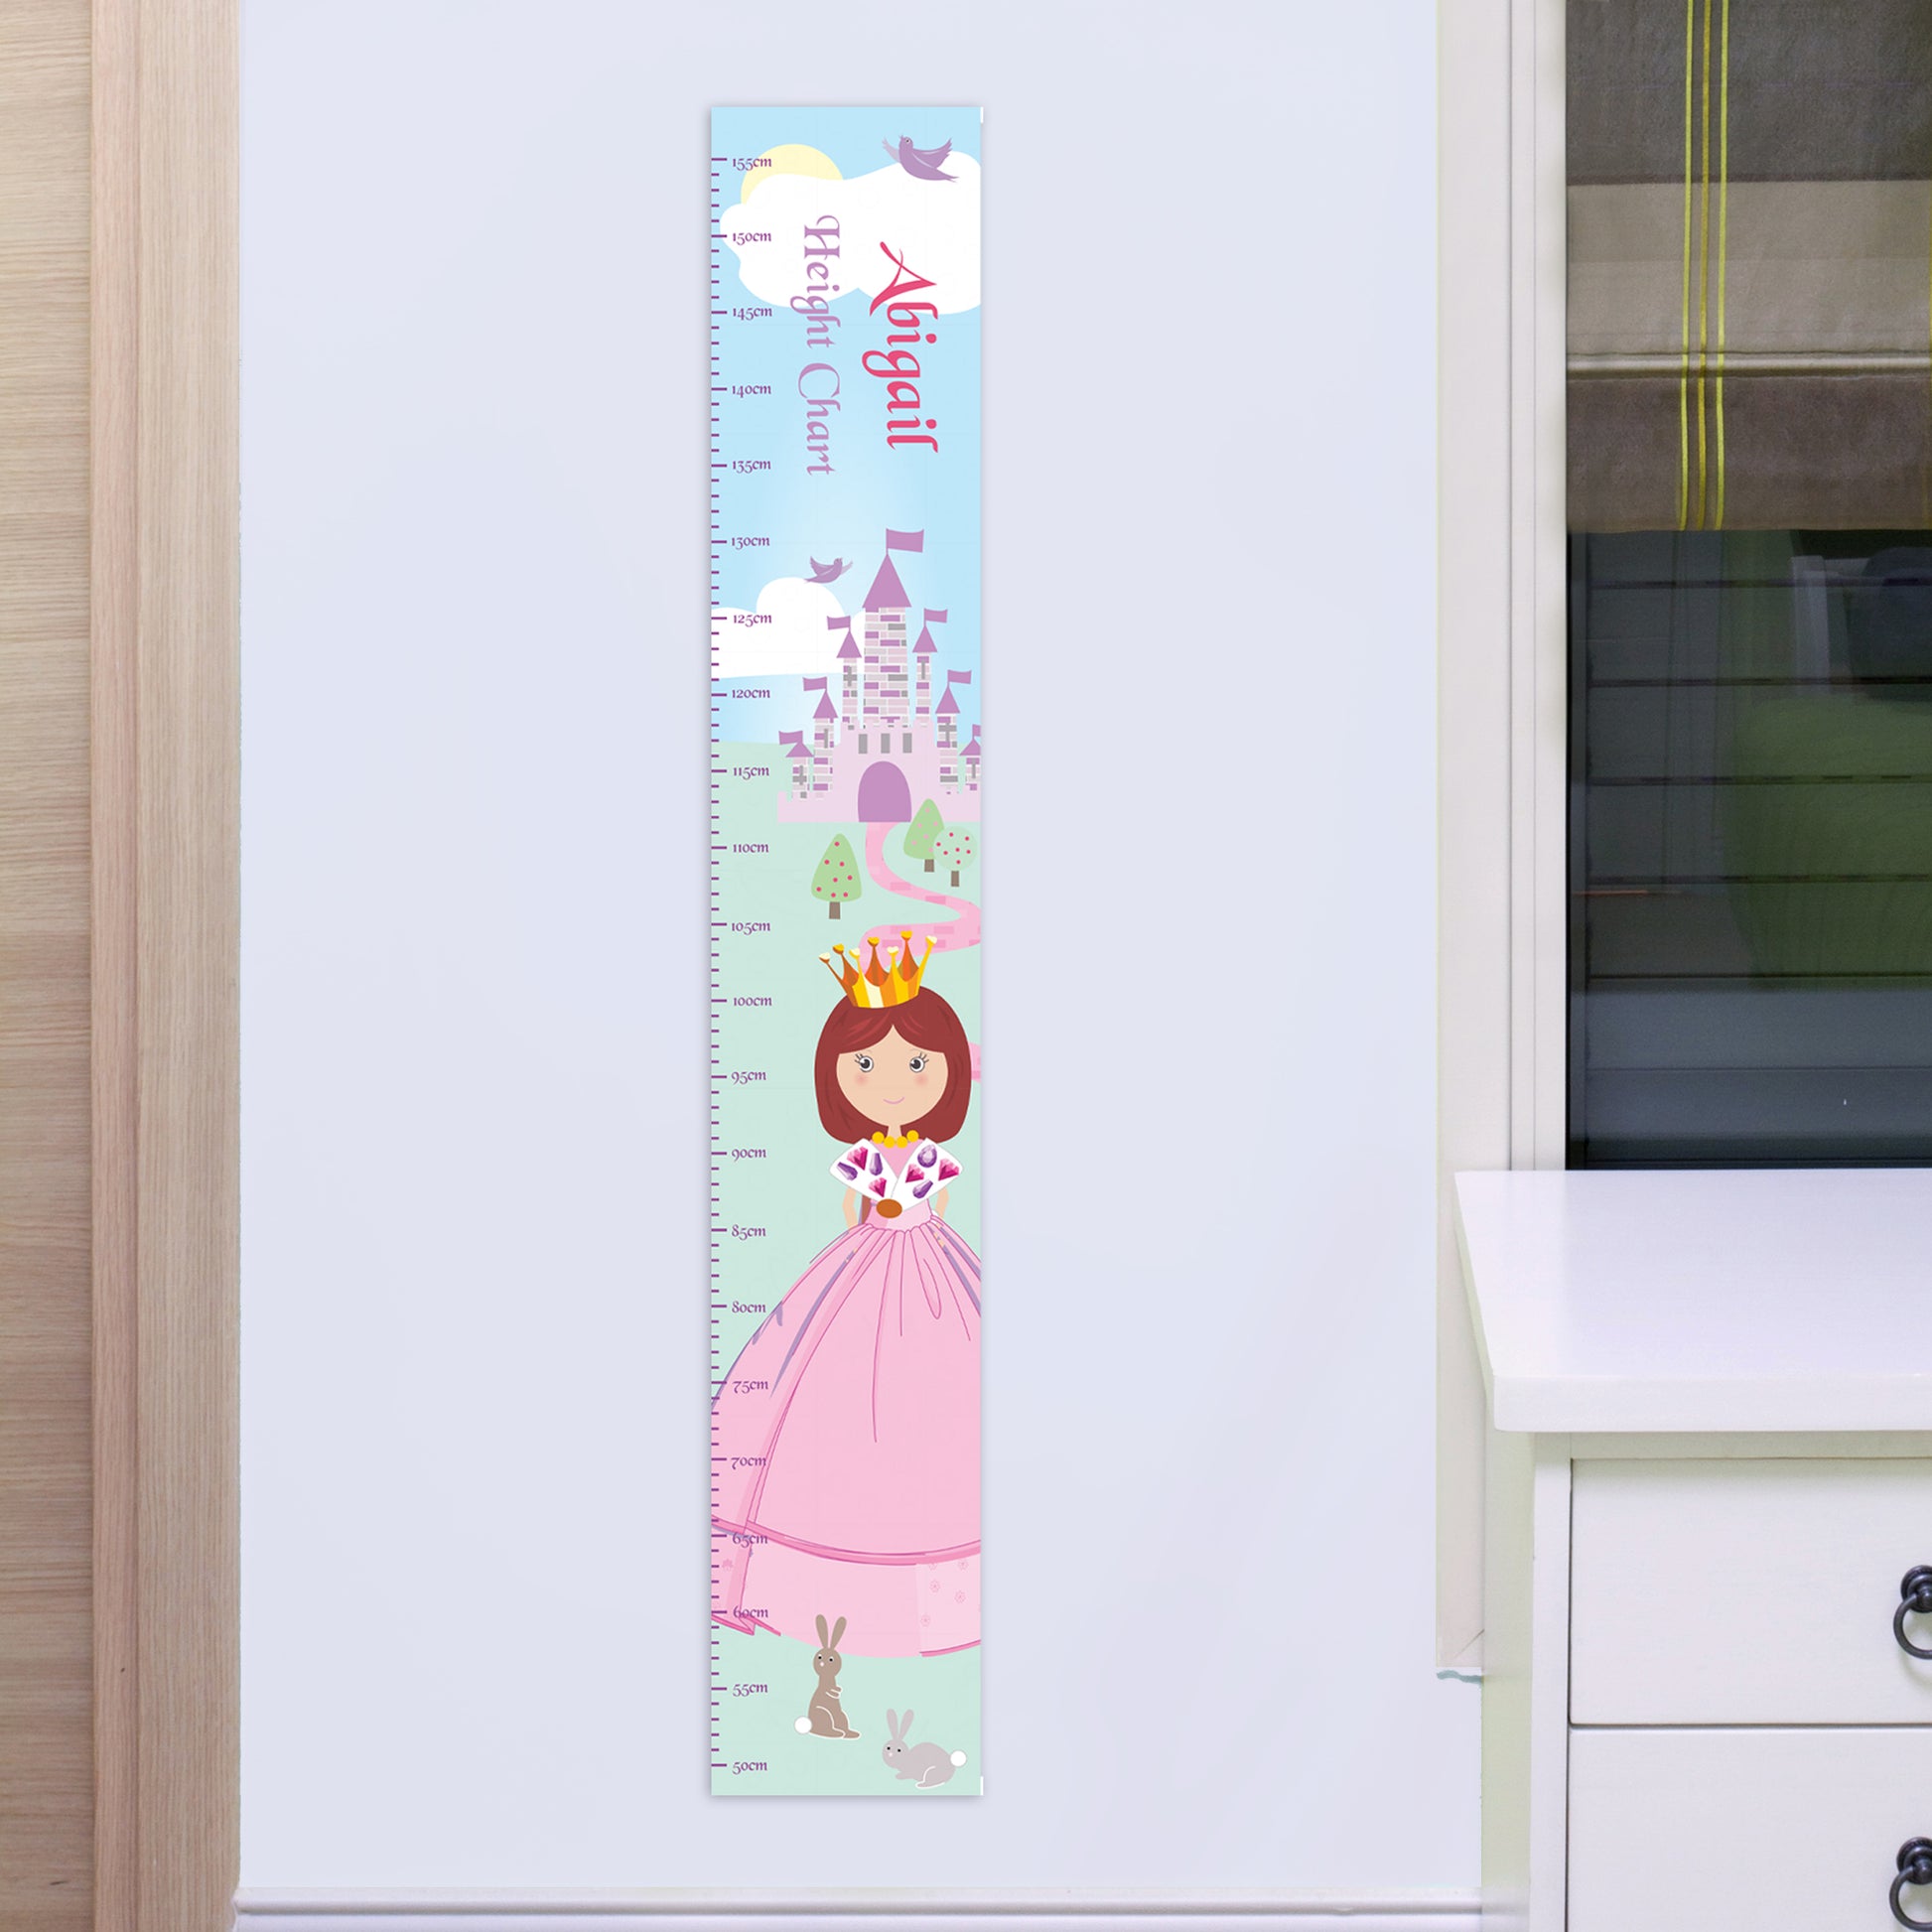 Fairy tale princess height chart - Lilybet loves